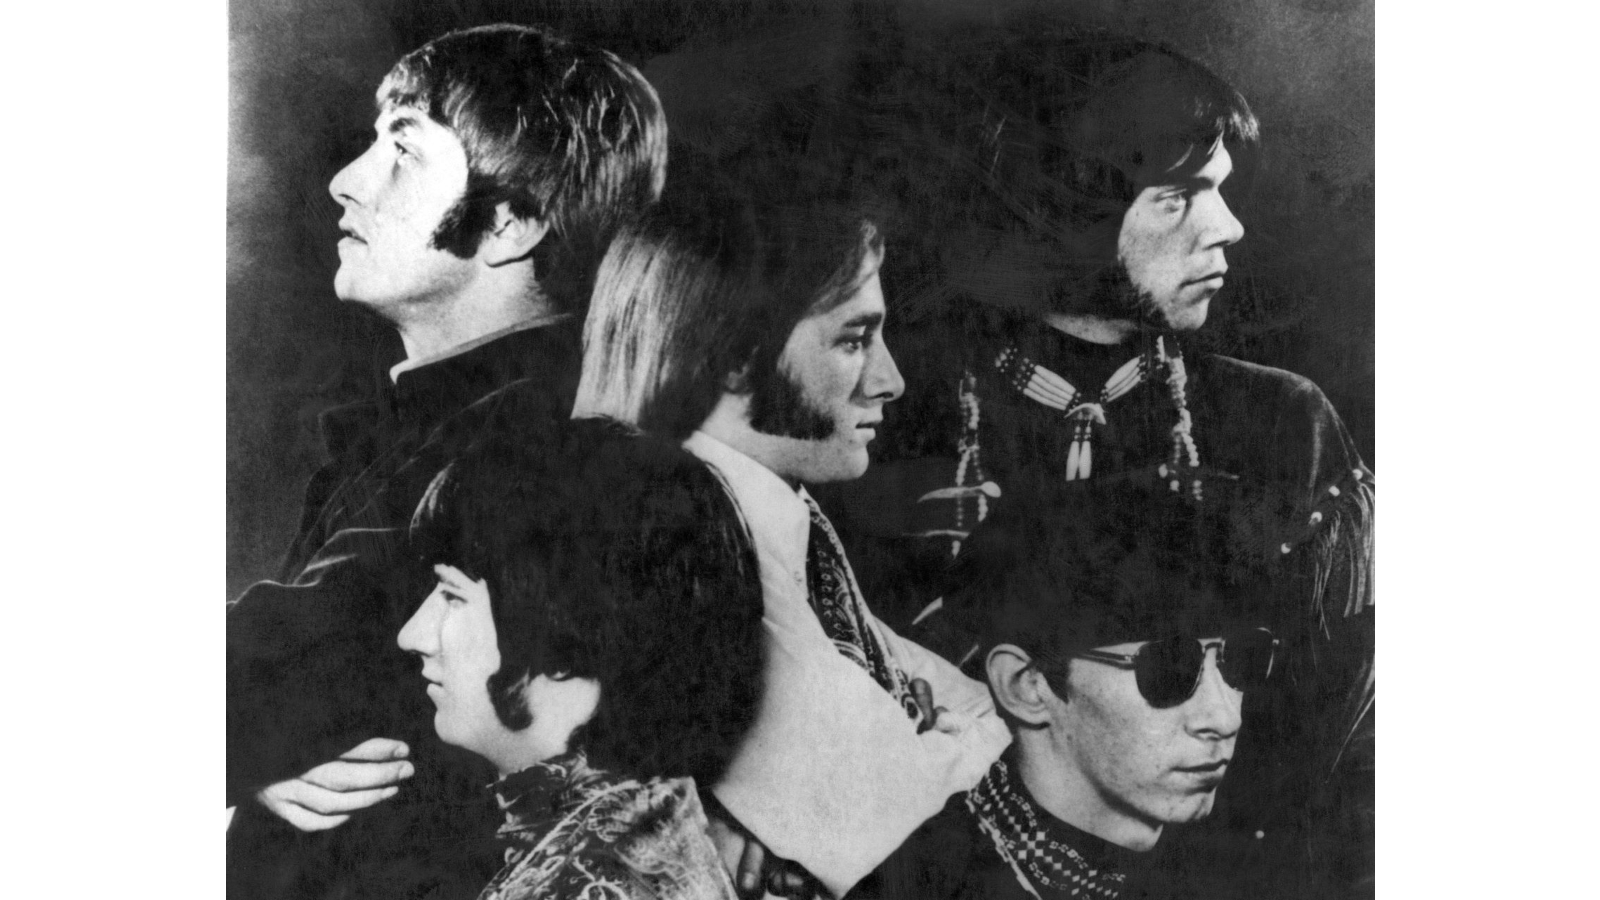 Here's Why Buffalo Springfield's Essential Listen | GuitarPlayer